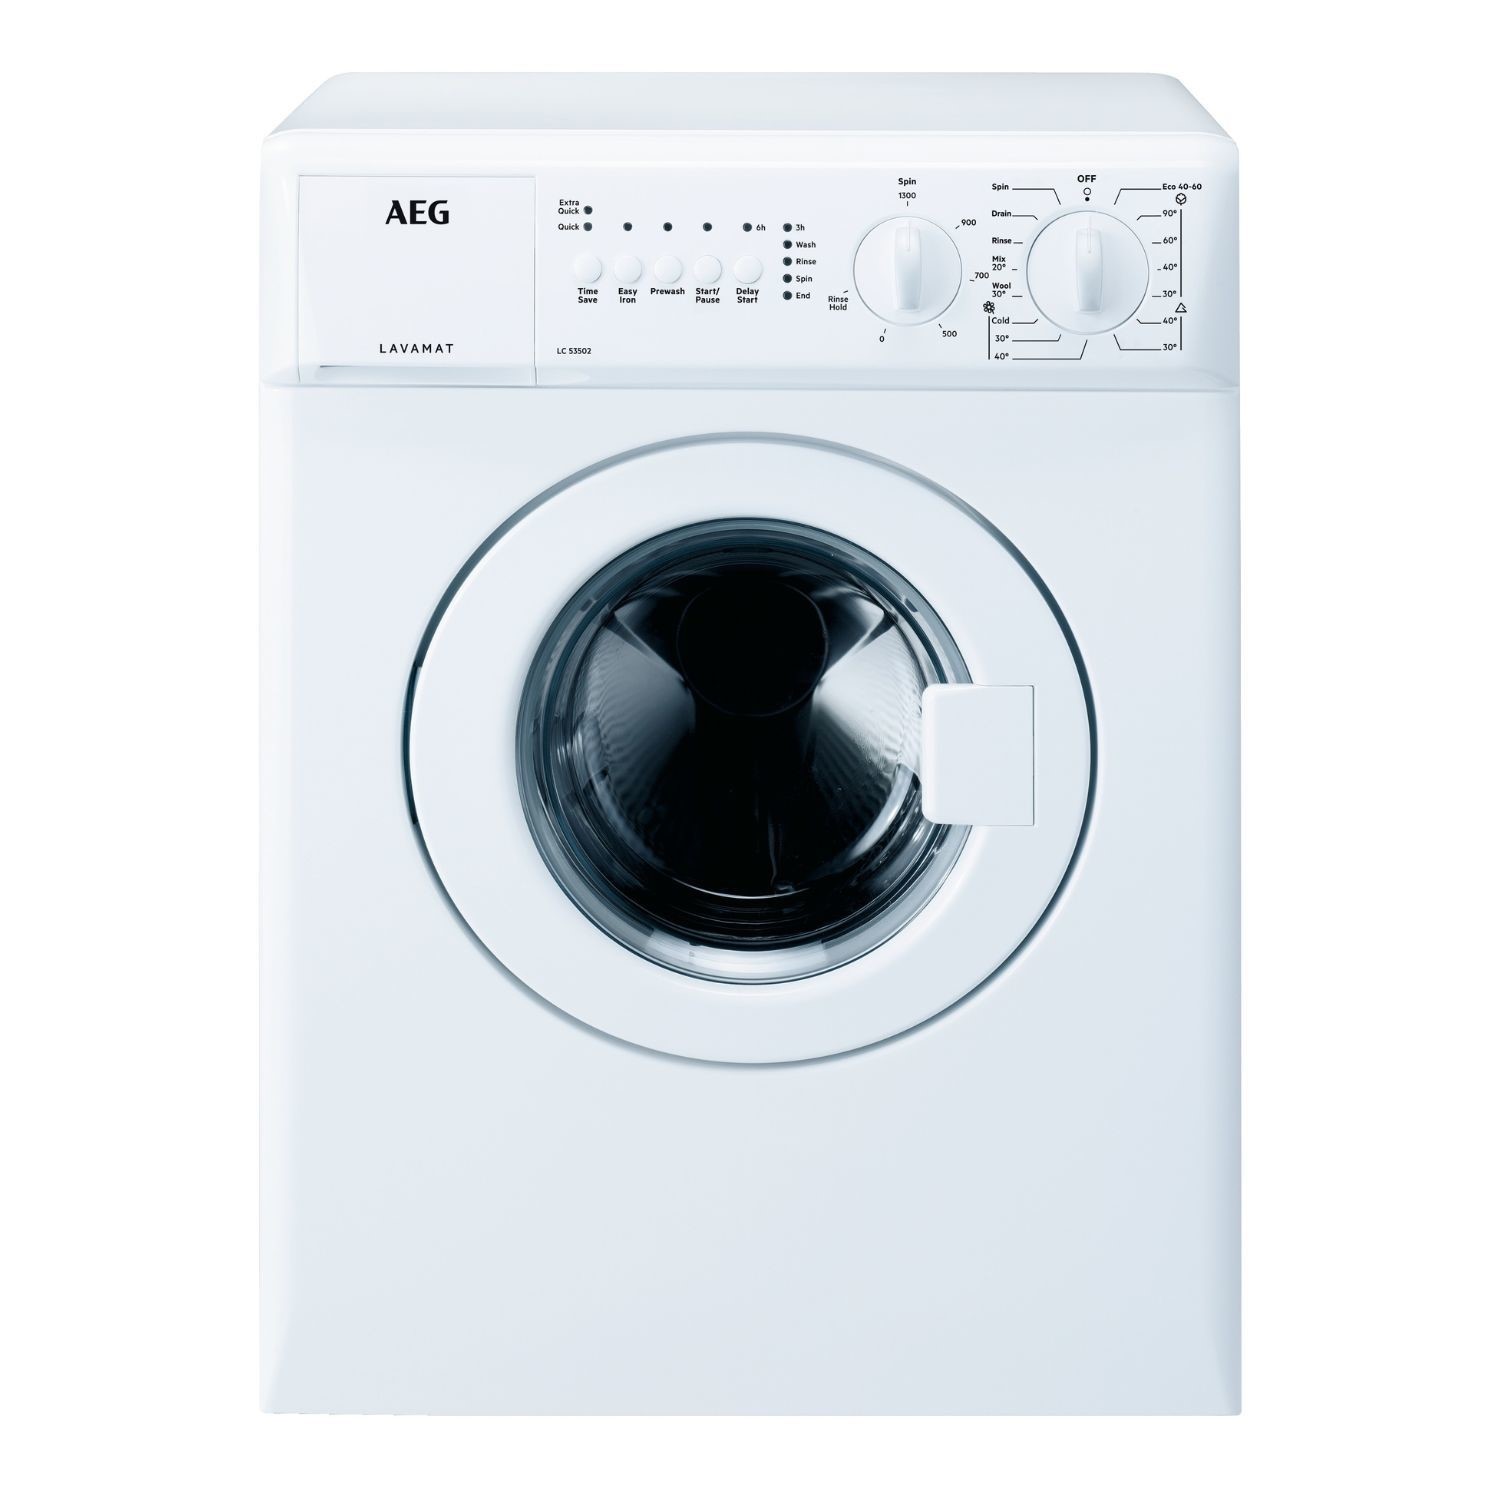 Photos - Other for Computer AEG 3kg 1300rpm Compact Washing Machine - White LC53502 